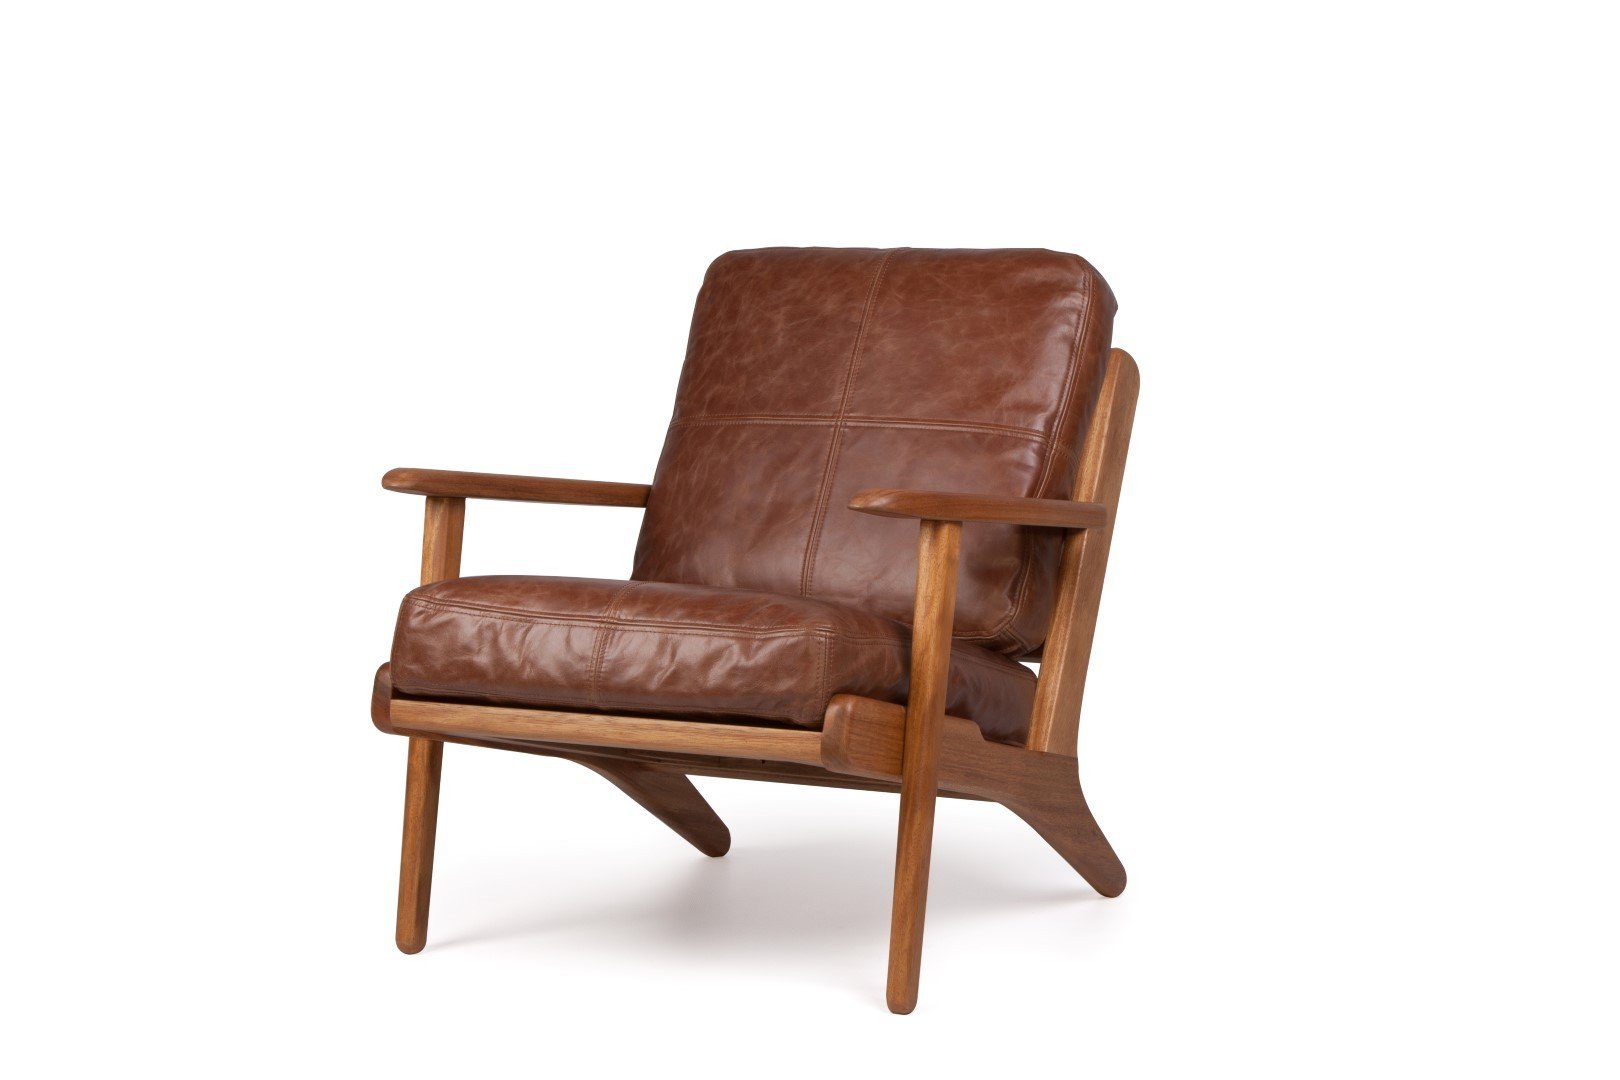 MAP Leather Arm Chair from The Modern